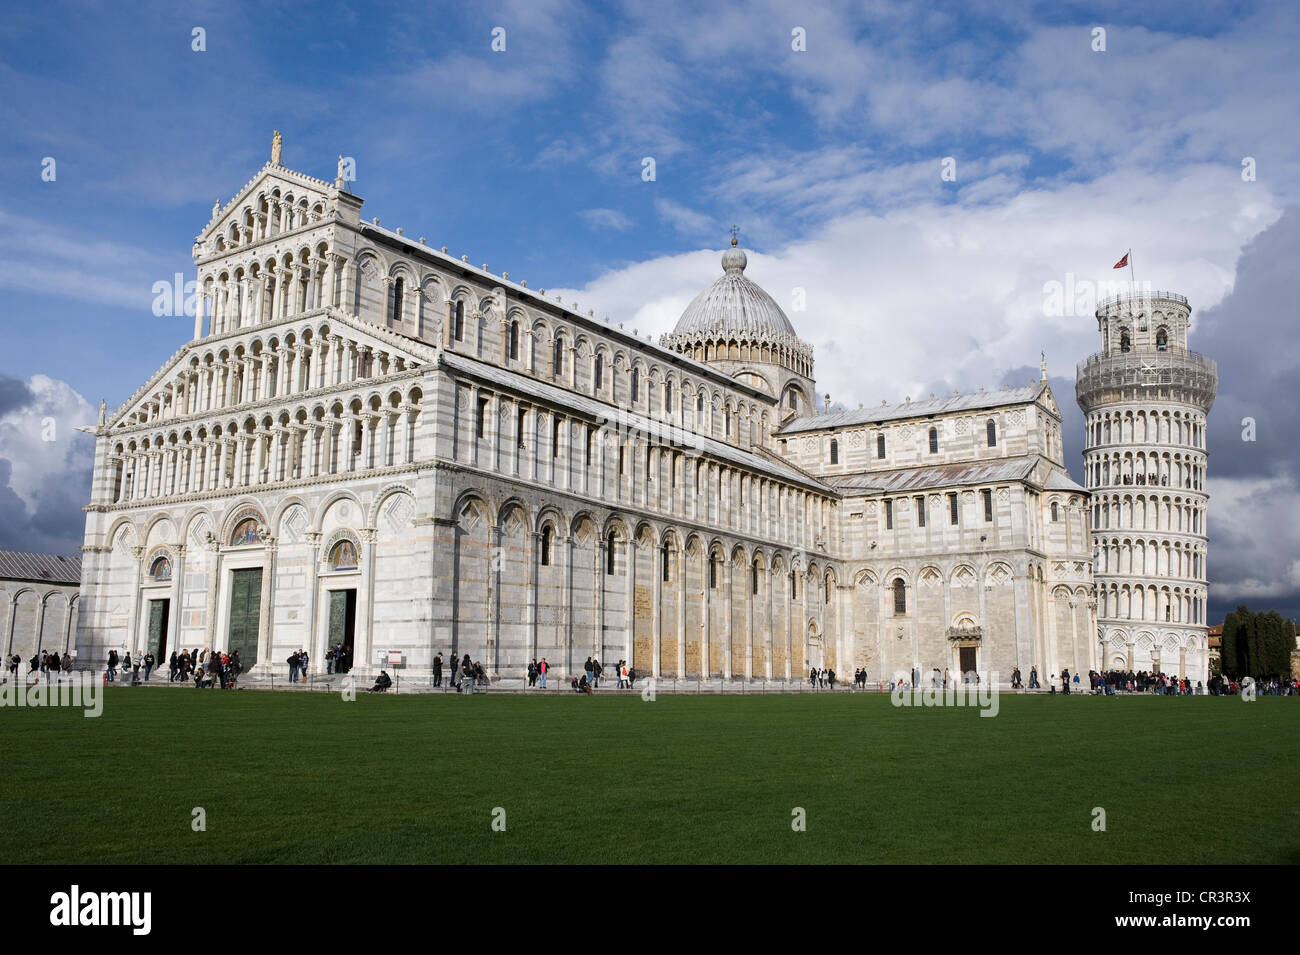 Leaning Tower of Pisa, cathedral, Piazza Dei Miracoli square, Pisa, Tuscany, Italy, Europe Stock Photo